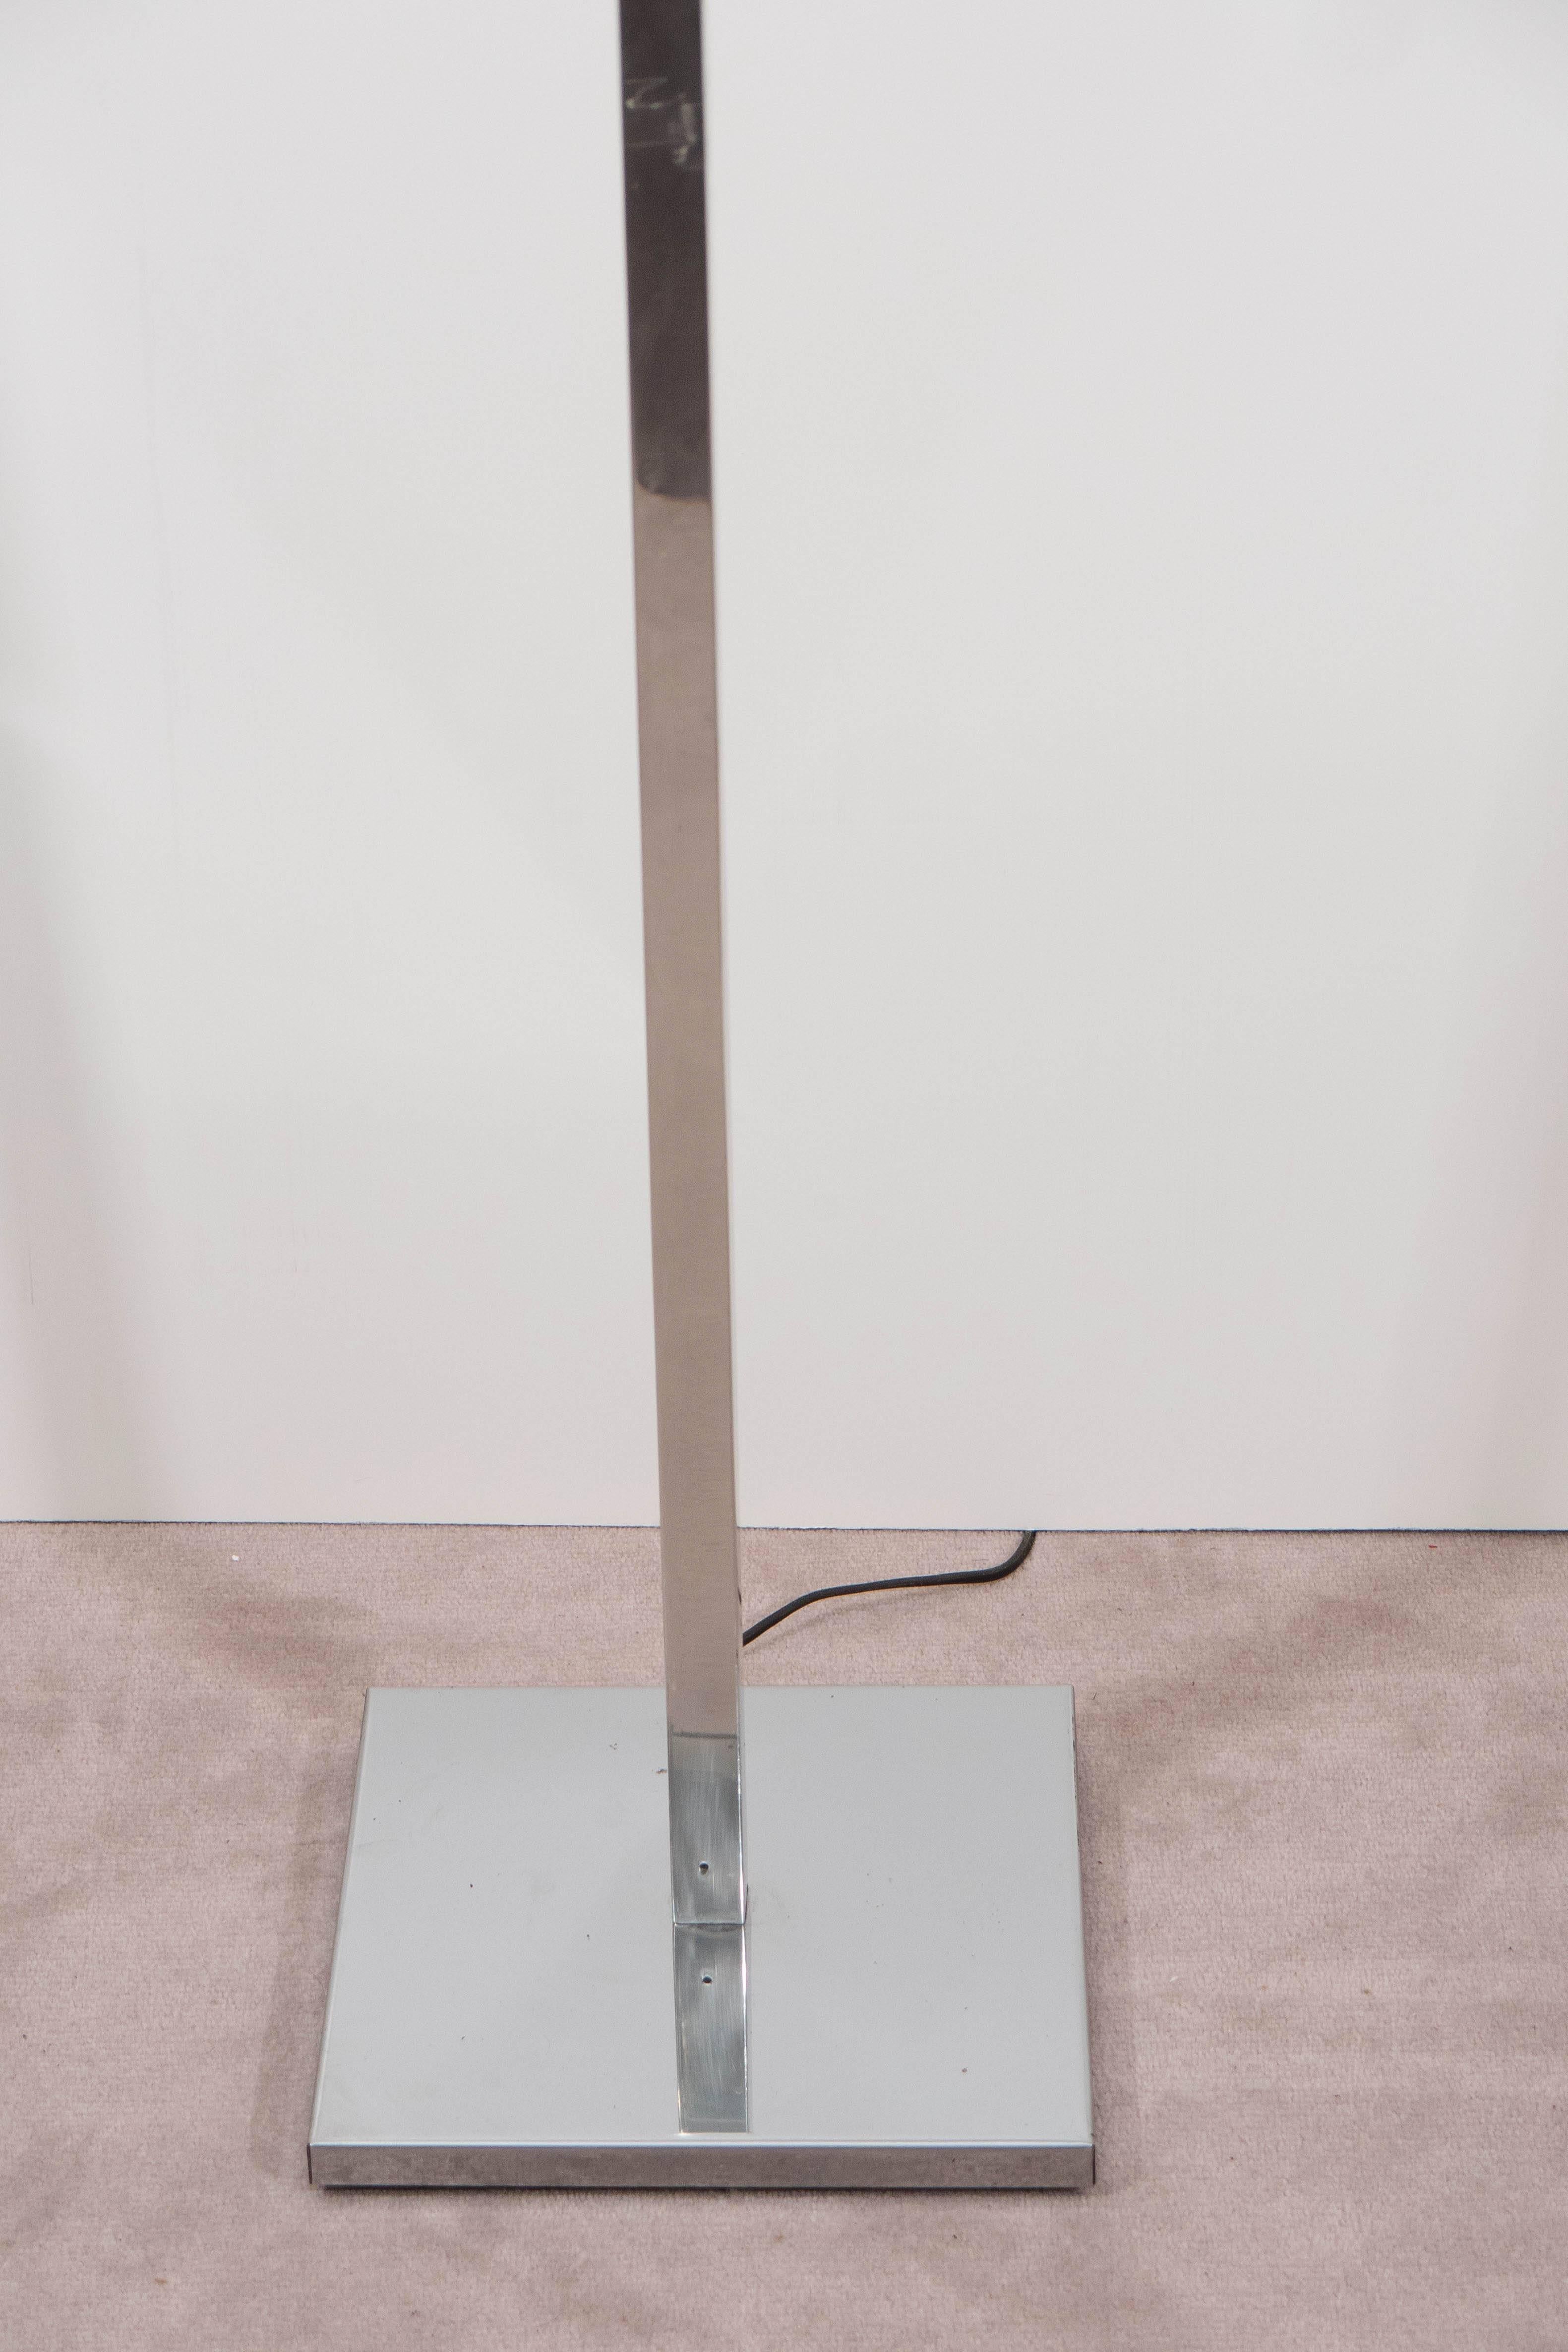 Pair of modernist floor lamp by Koch and Lowy, with three pivoting shades in polished chrome. Good vintage condition with a few minor scratches to stem. Shades extend to a maximum of 20" width. Base is 10" square.